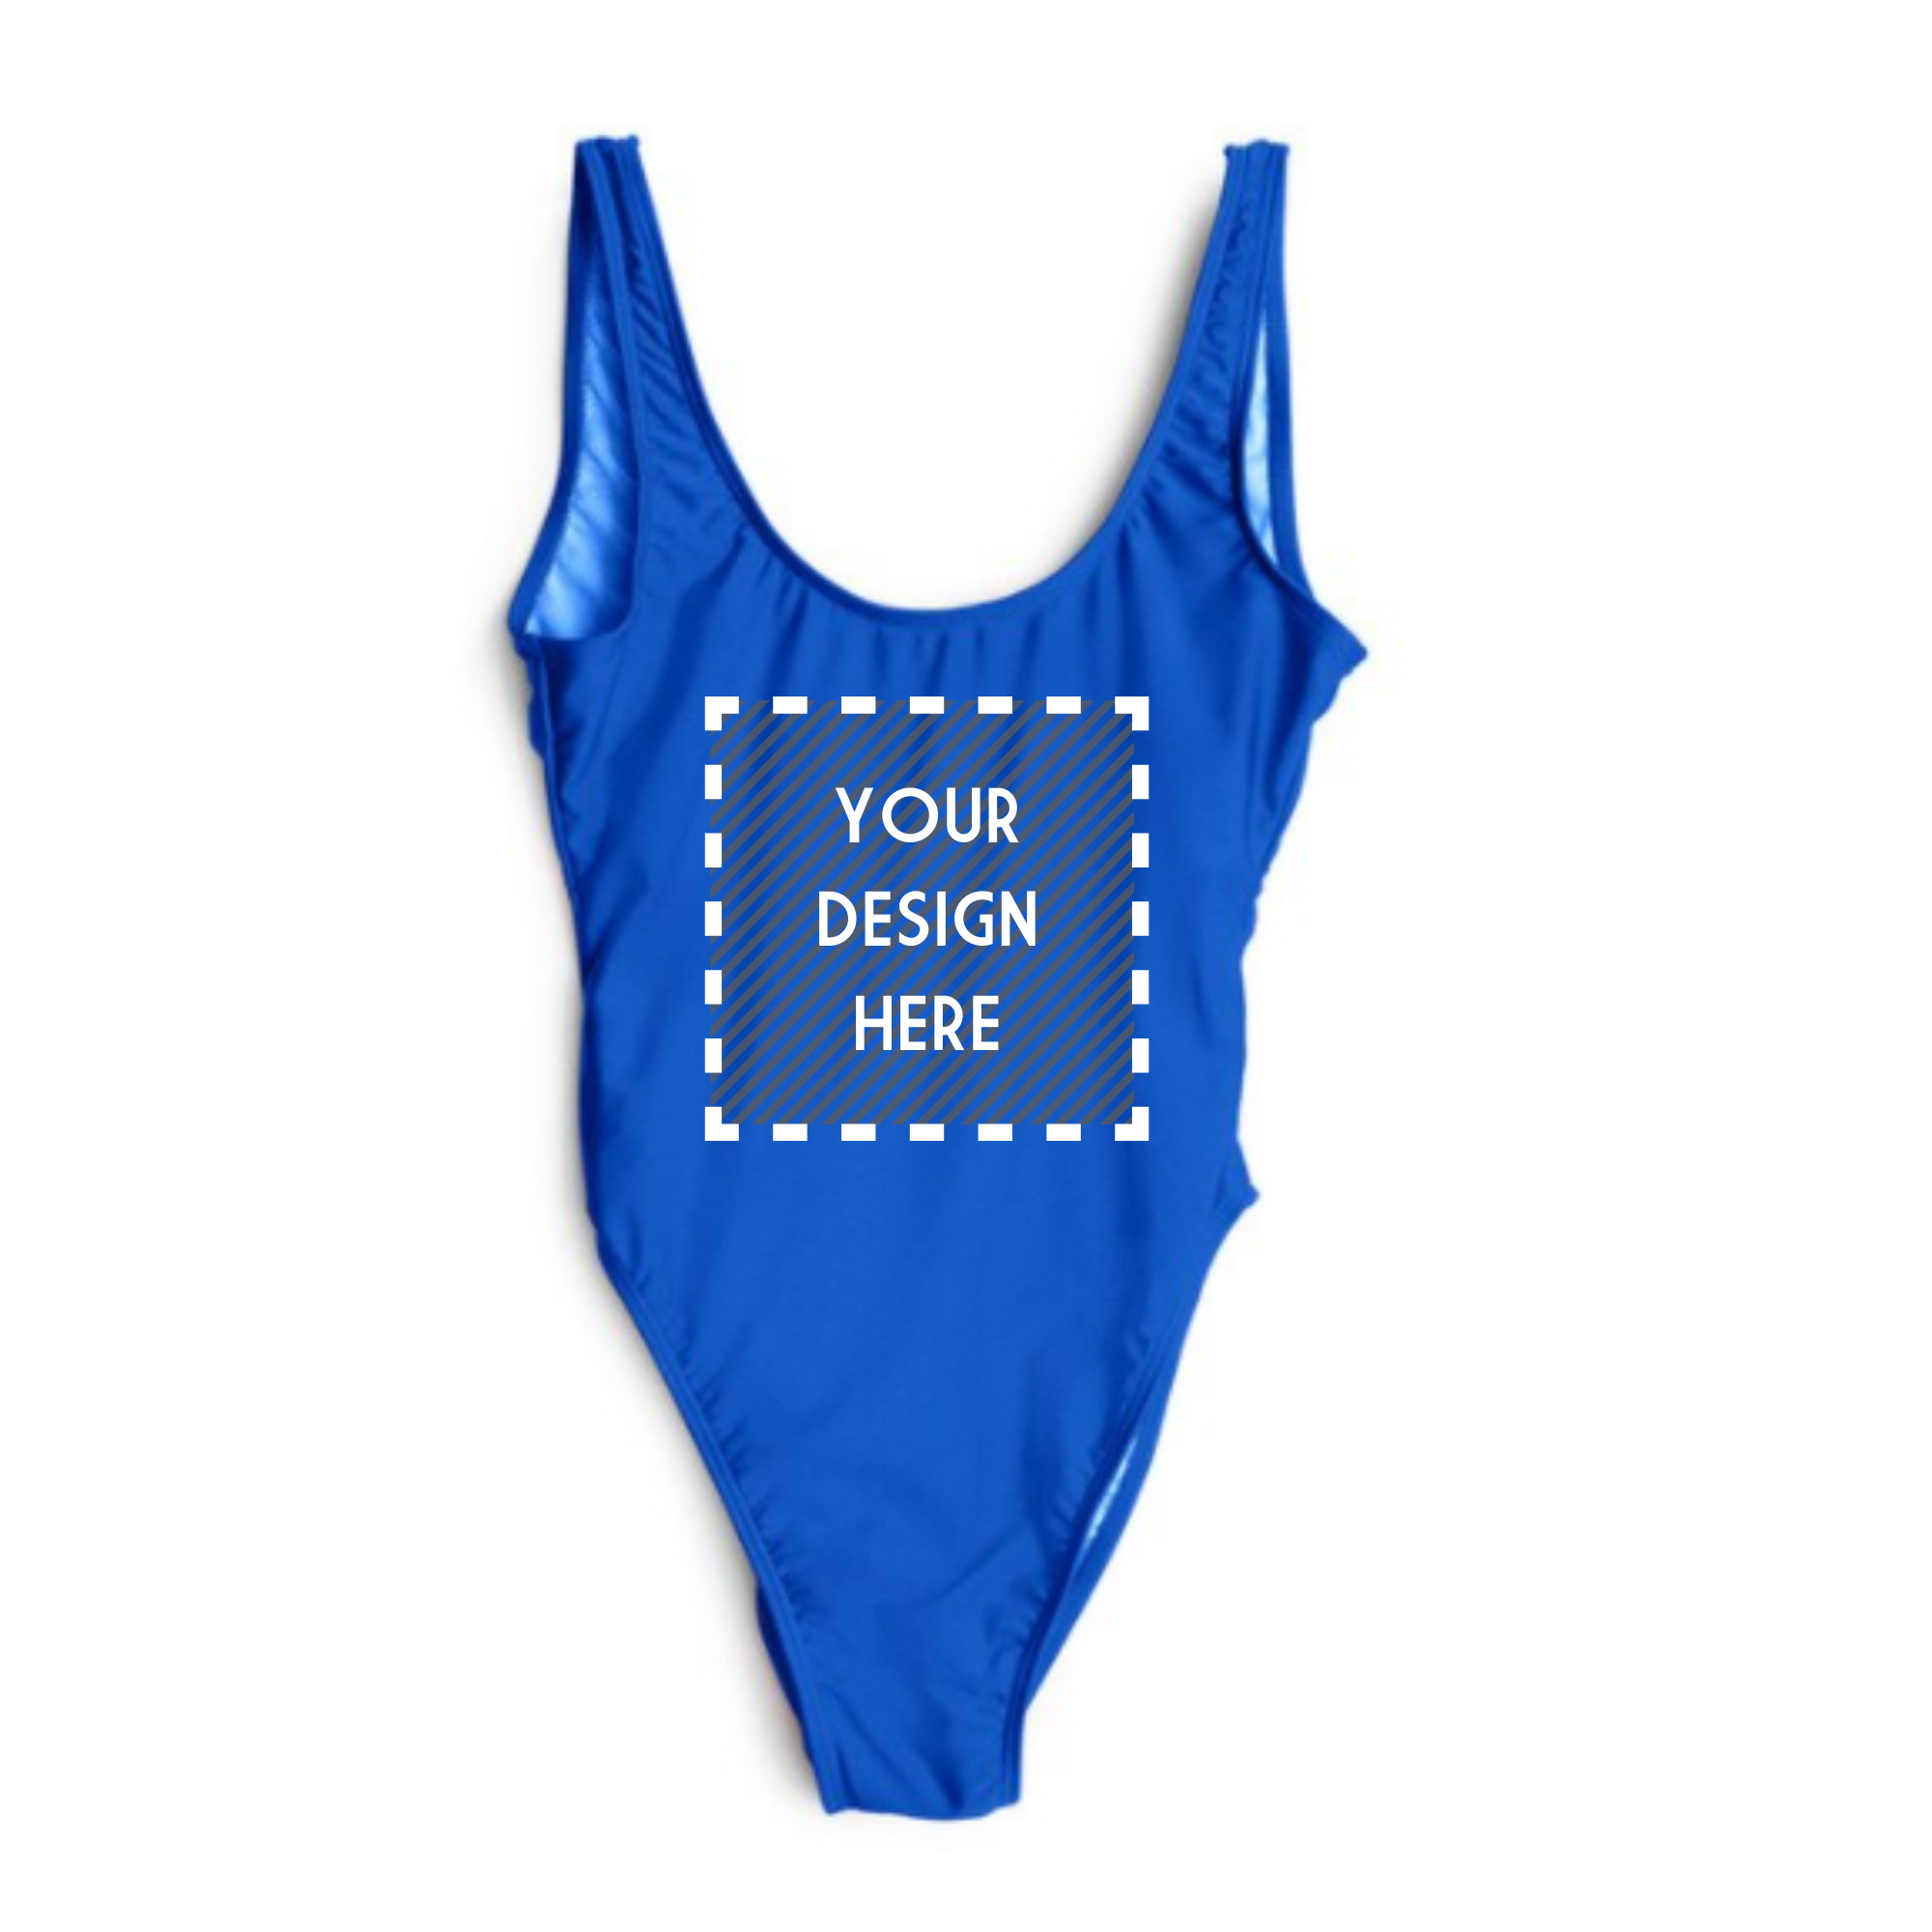 A black swimsuit with a customizable area on the front